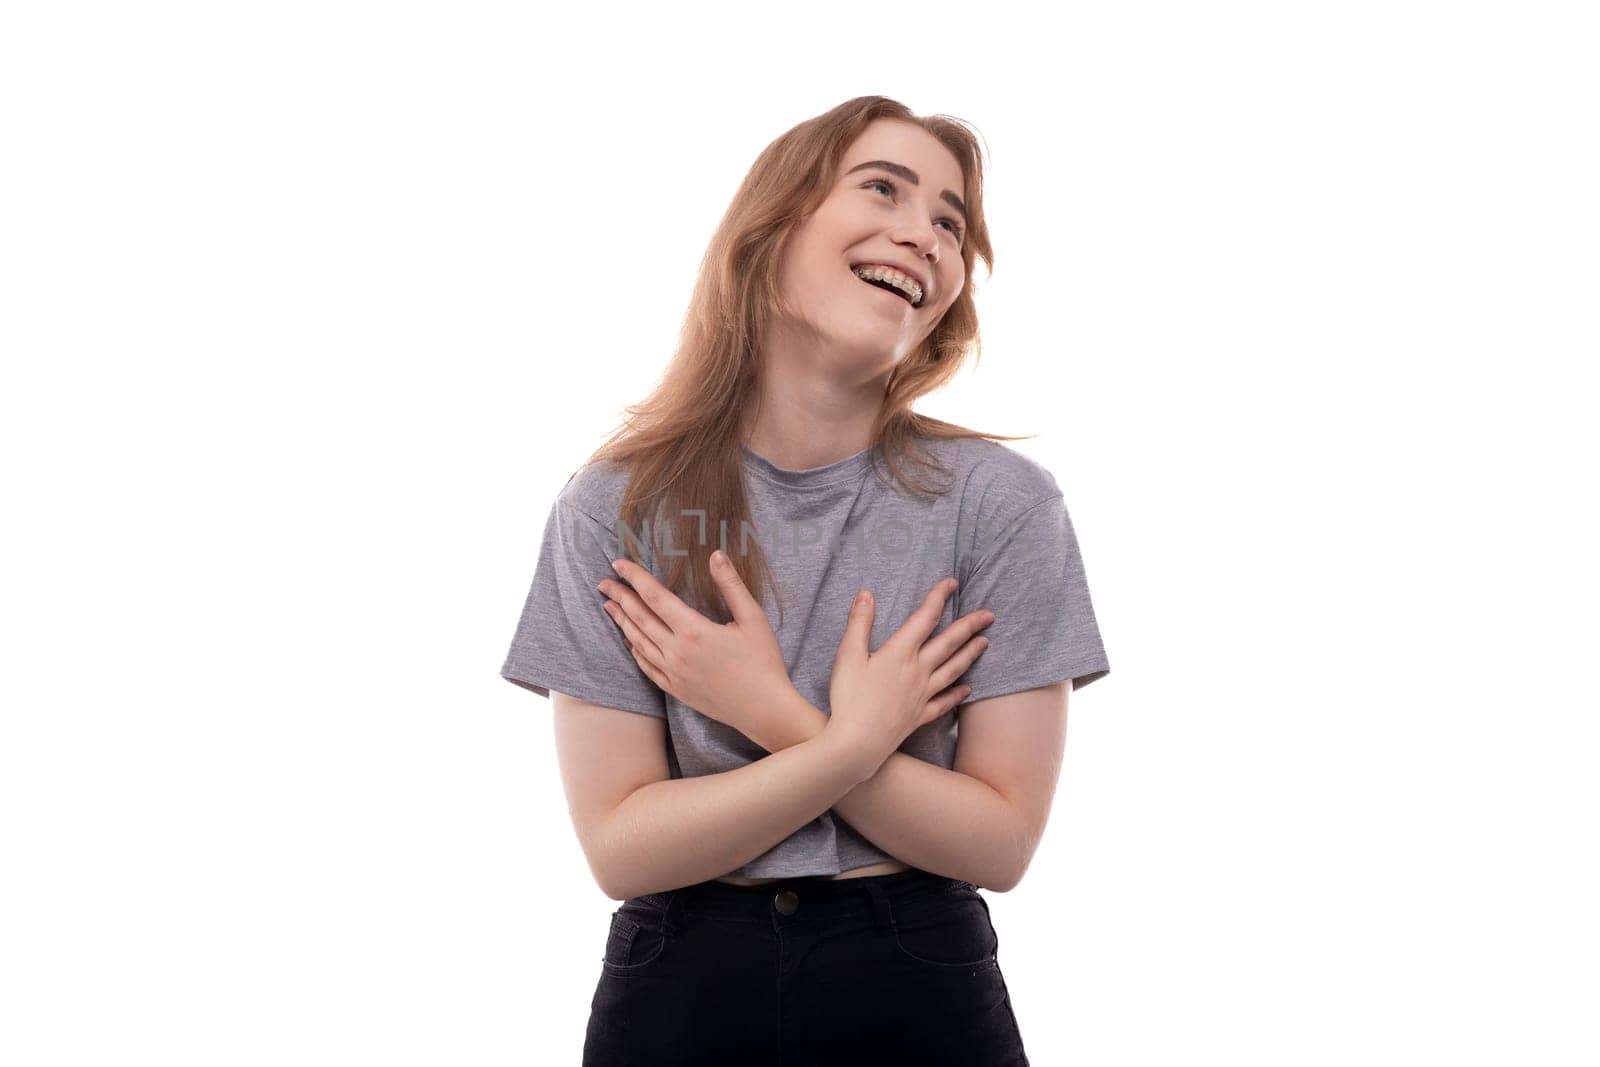 Teenage girl with blond hair in a gray T-shirt laughs on a white background by TRMK